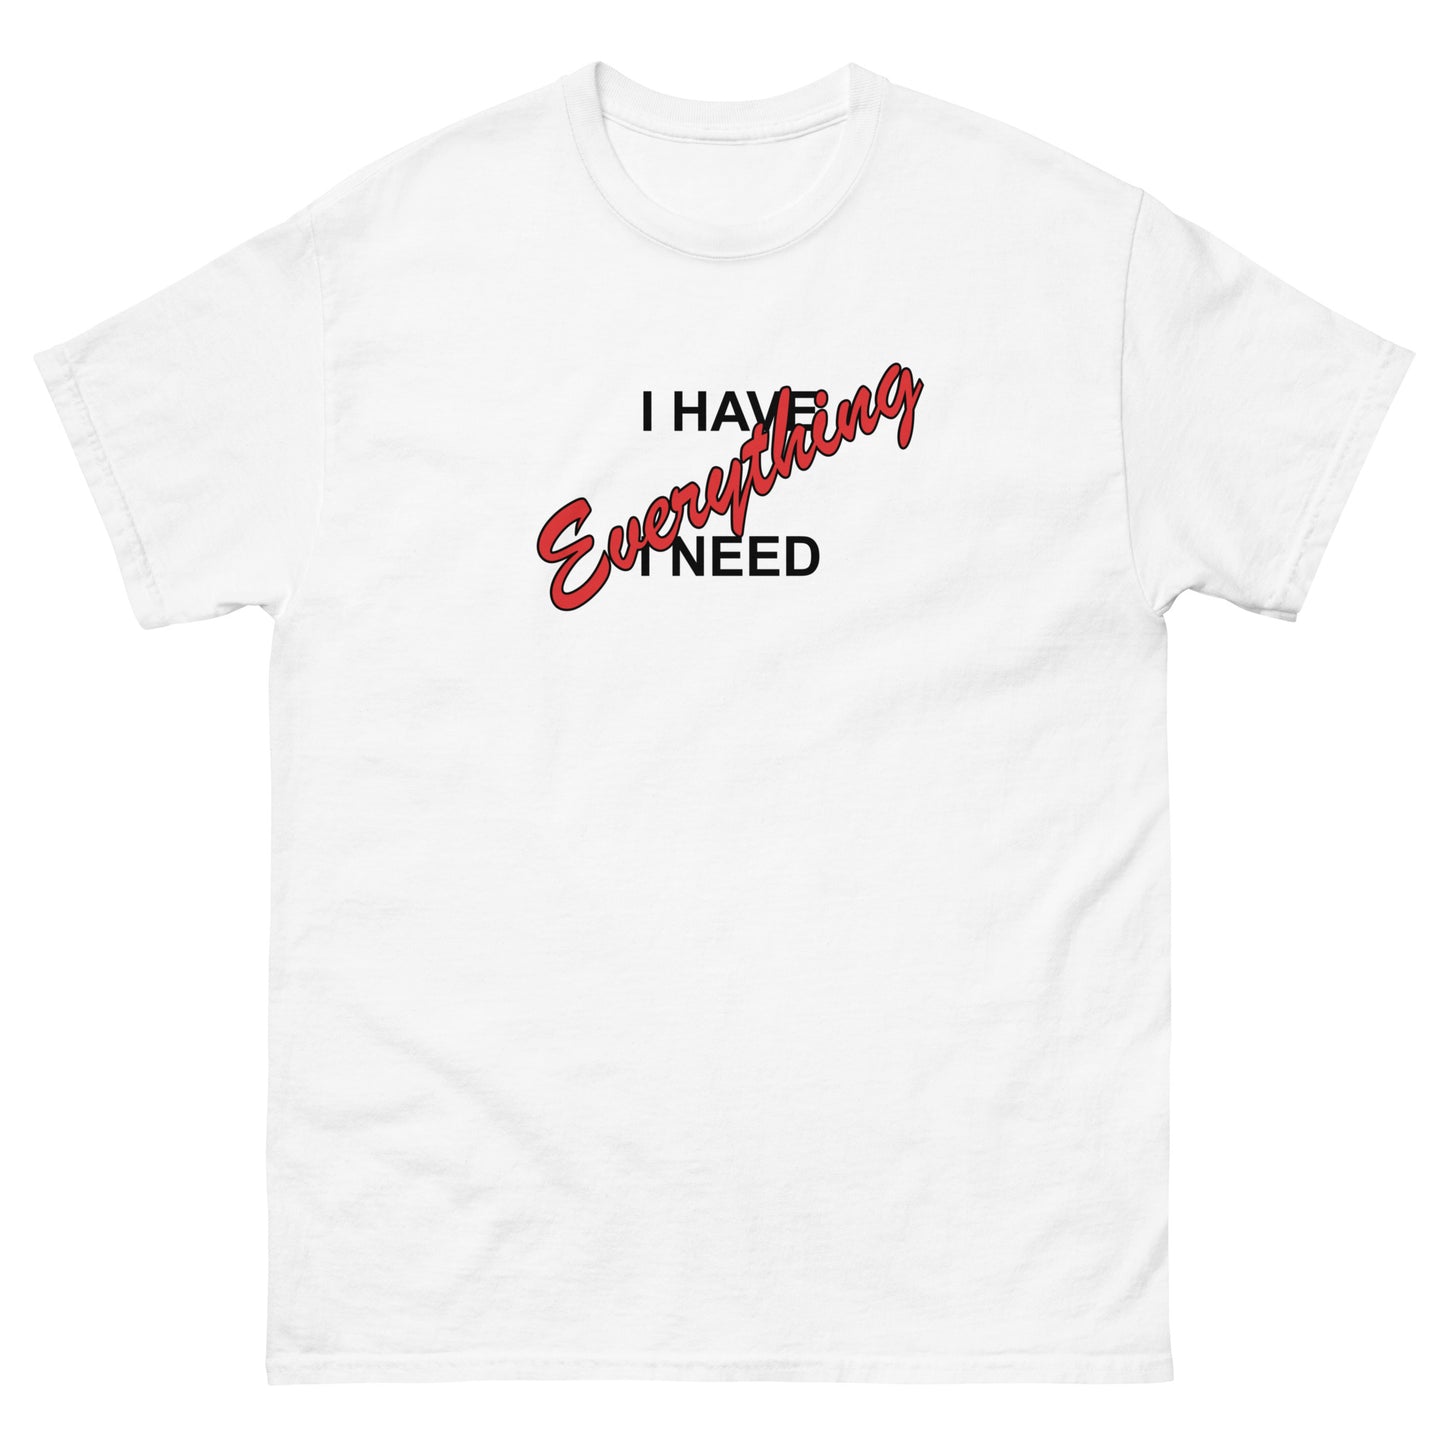 I HAVE EVERYTHING I NEED (black outlined letters) - Unisex